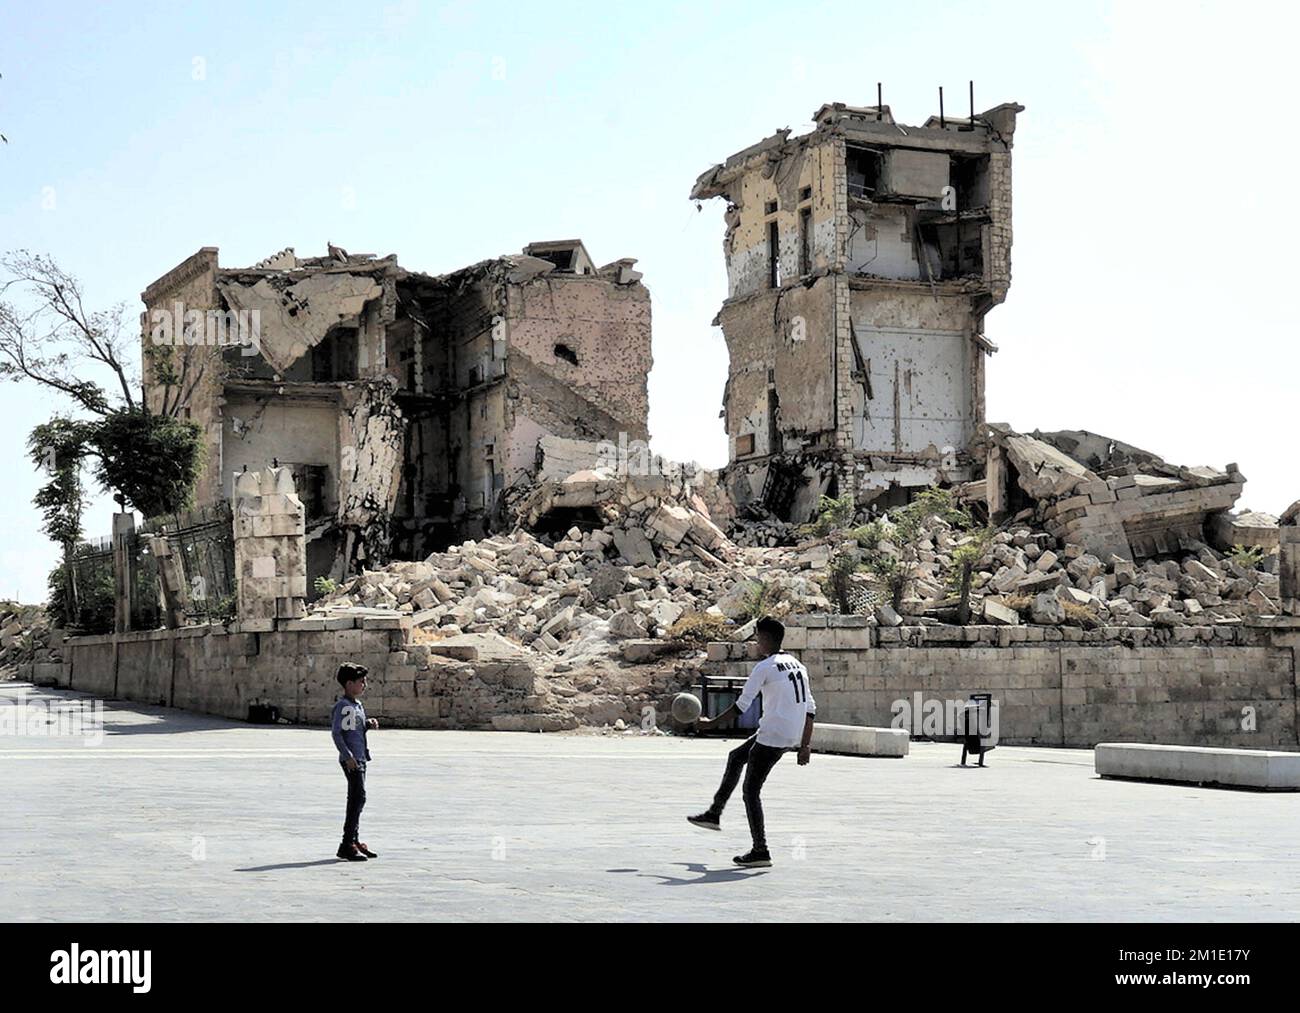 Two boys playing with a ball in the square in front of the citadel next to a destroyed Grand Serail government building, Aleppo, Syria Stock Photo